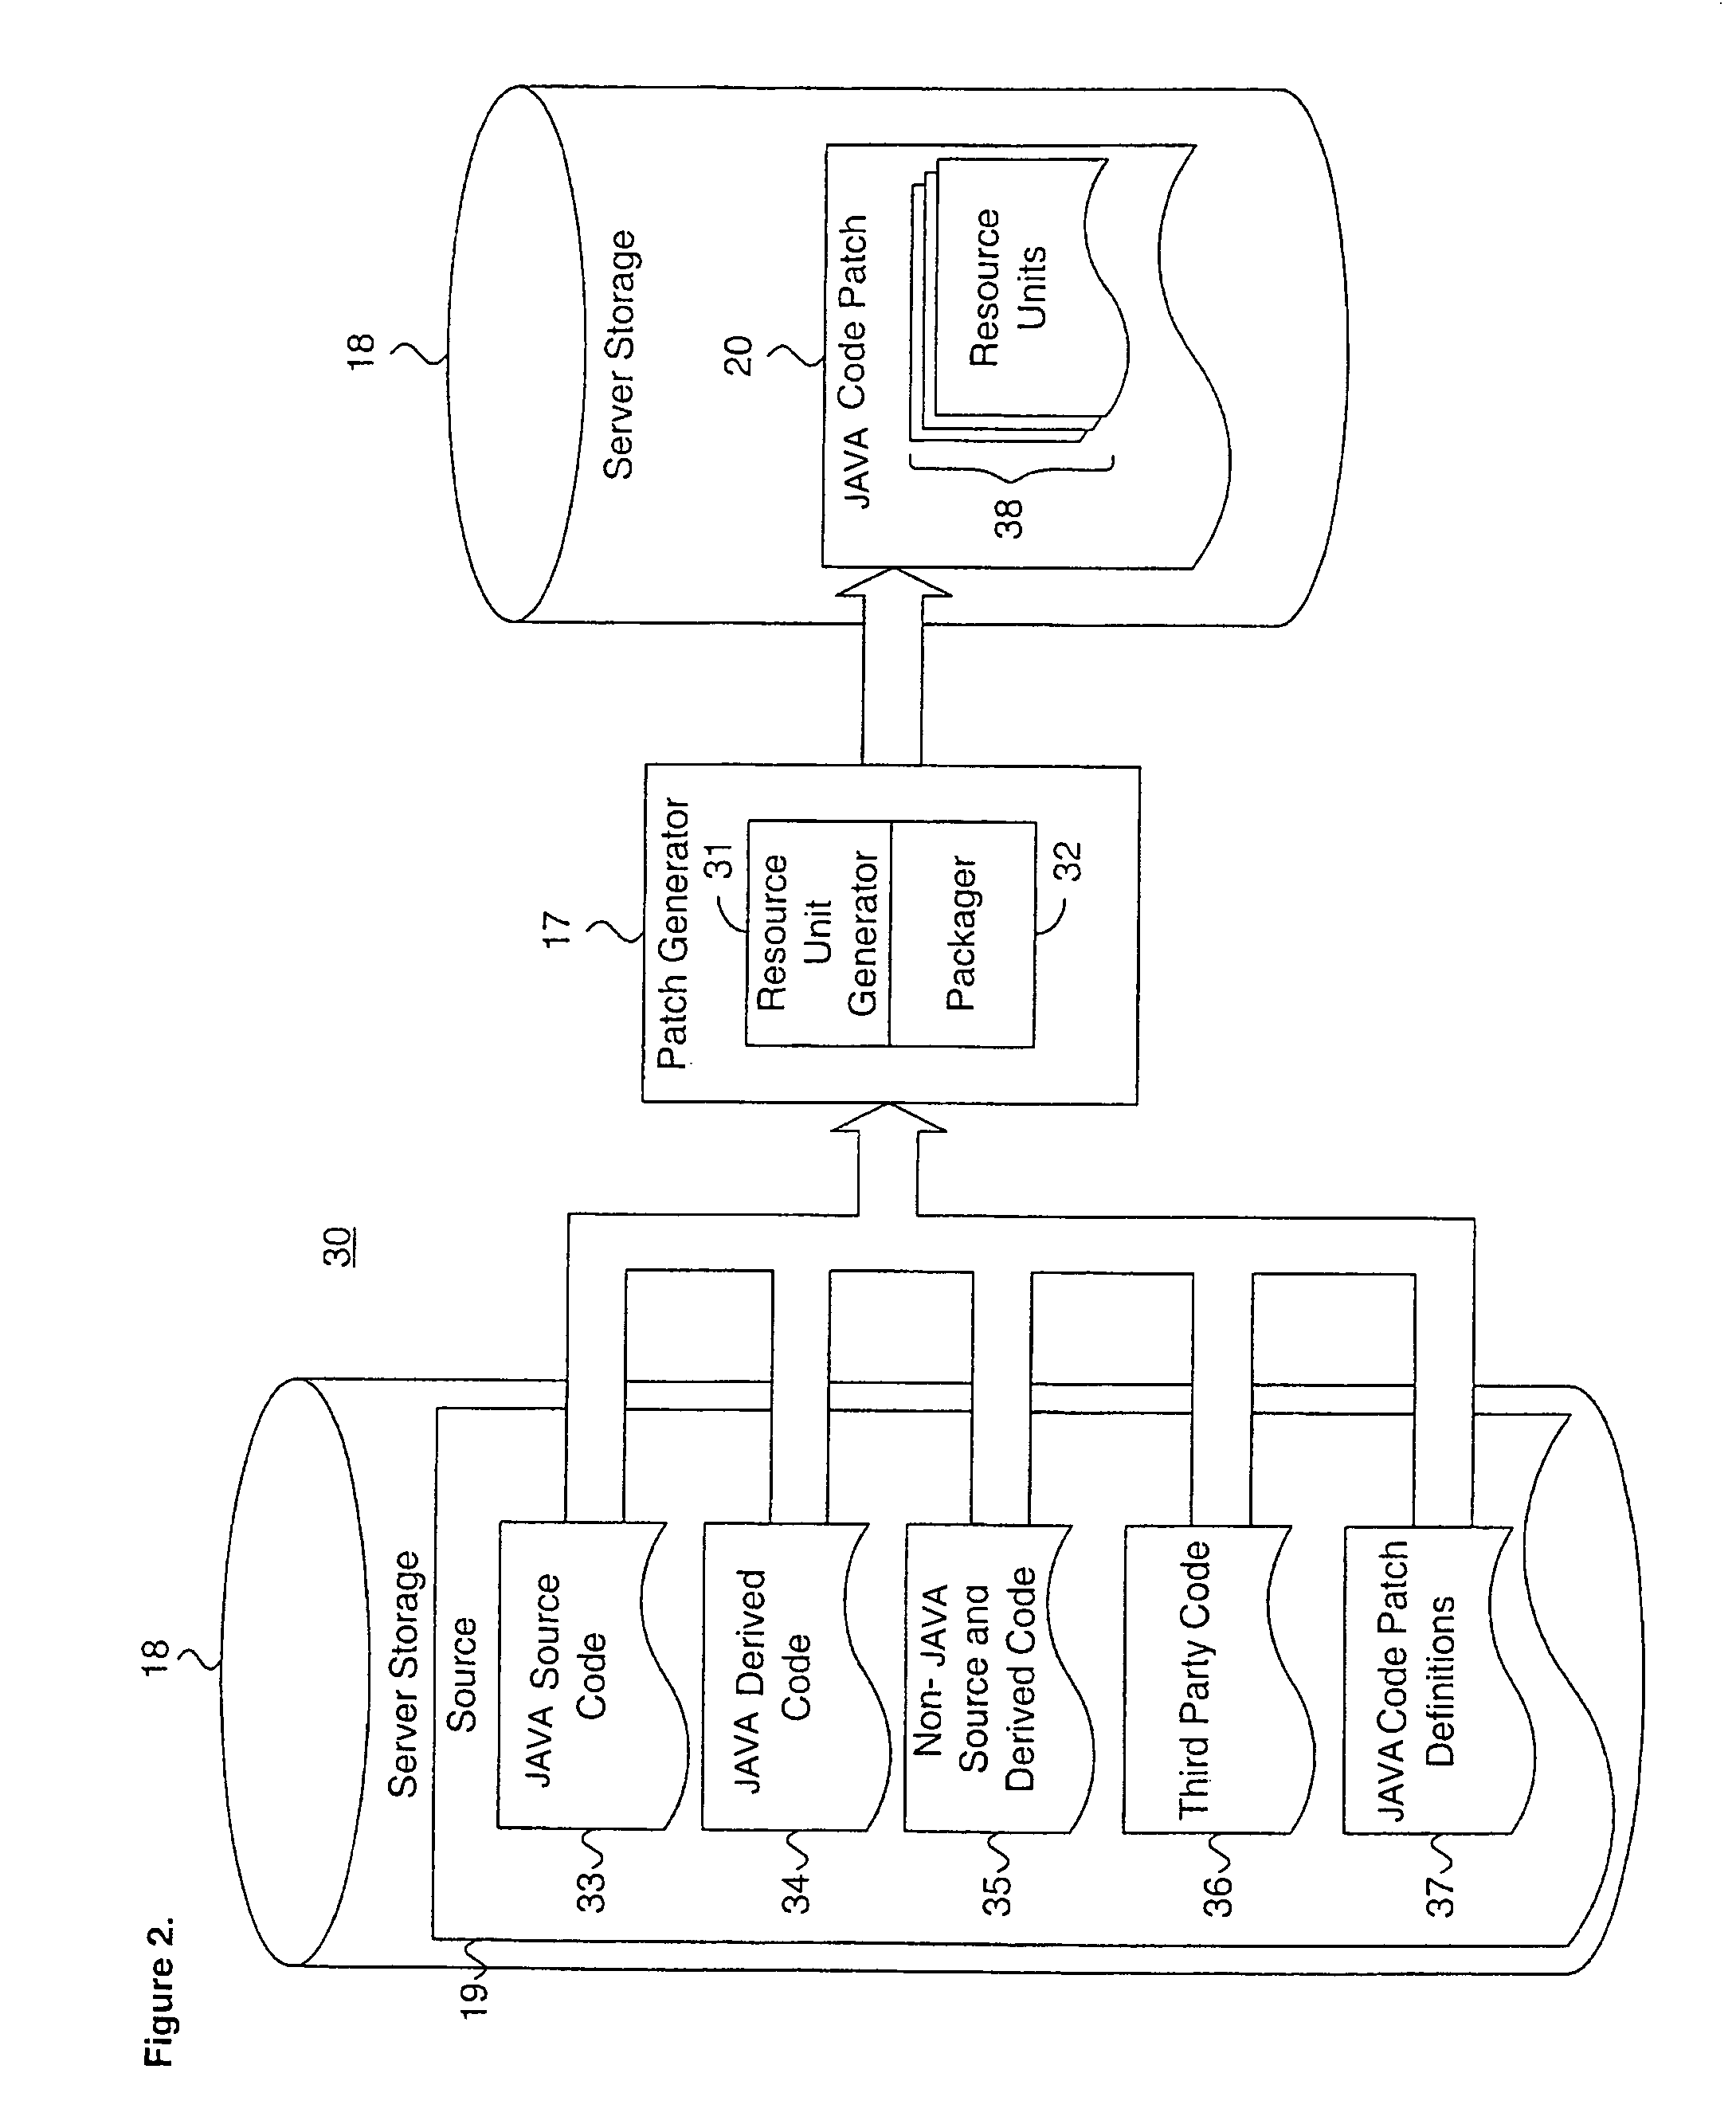 System and method for providing a java code release infrastructure with granular code patching